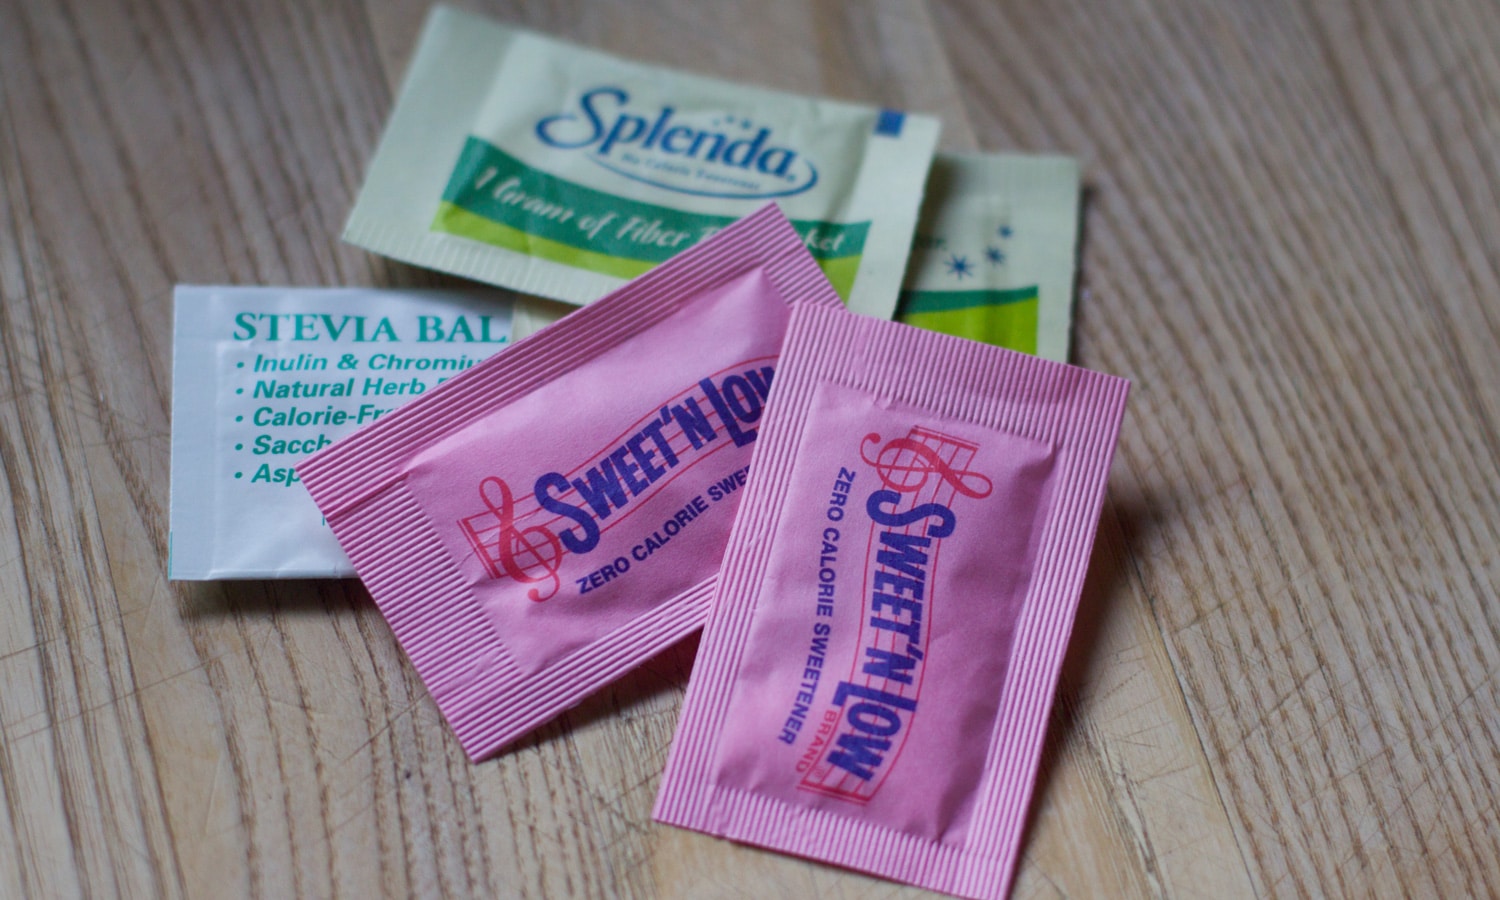 Can Artificial Sweeteners Contribute To Weight Loss?